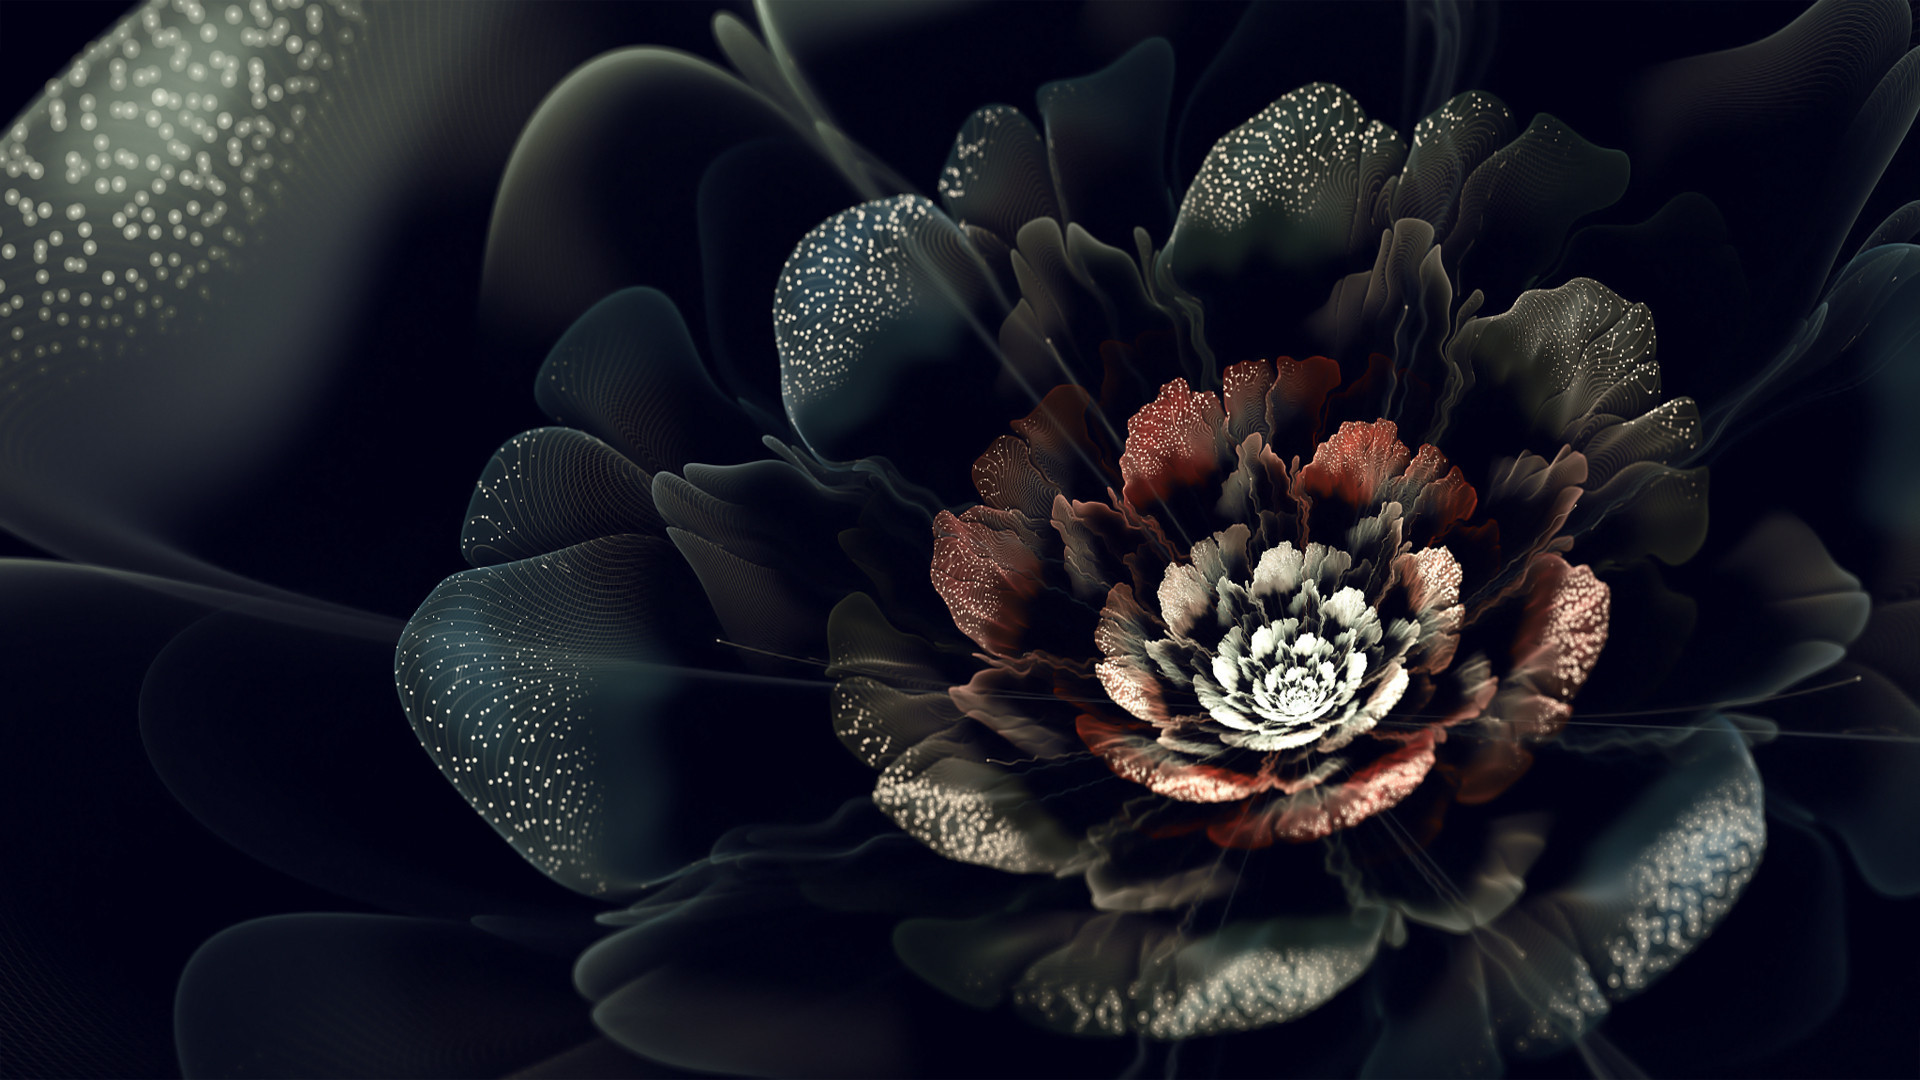 Black Roses Wallpapers Pictures Find best latest Black Roses Wallpapers Pictures in HD for your PC desktop background and mobile phones